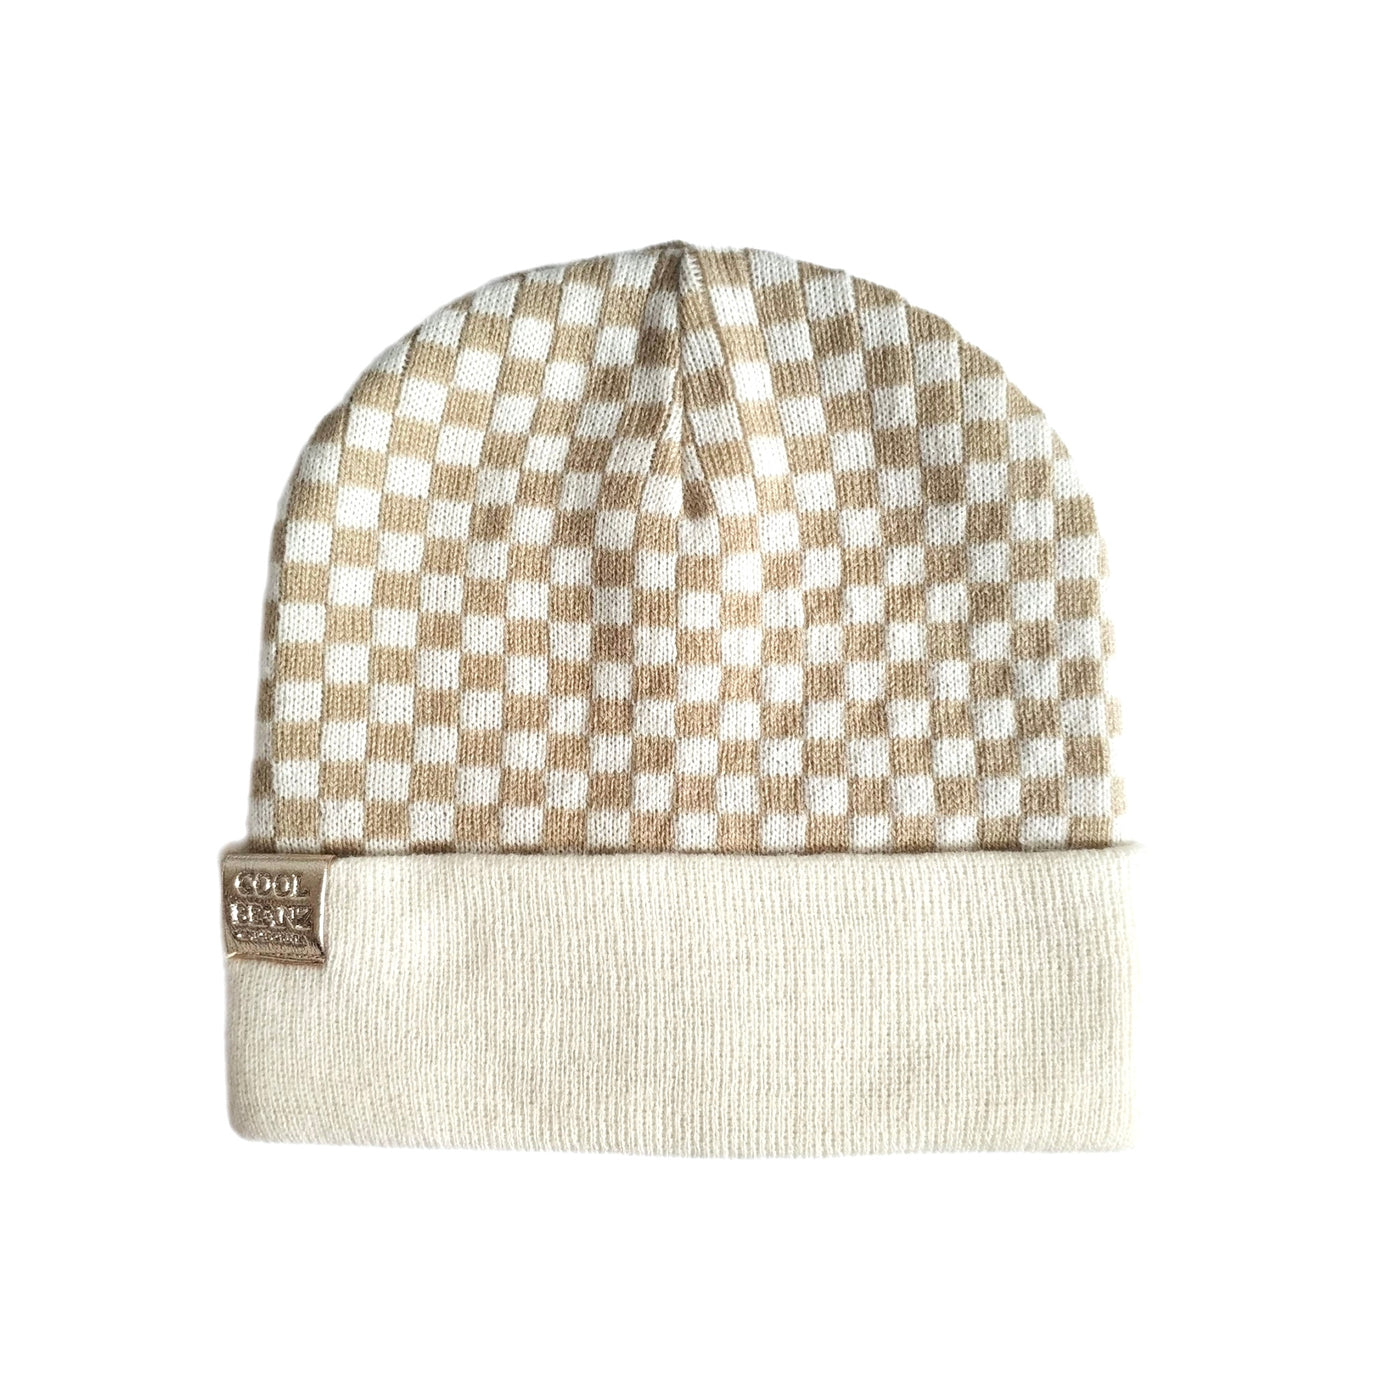 Check Yourself Reversible Beanz Beige